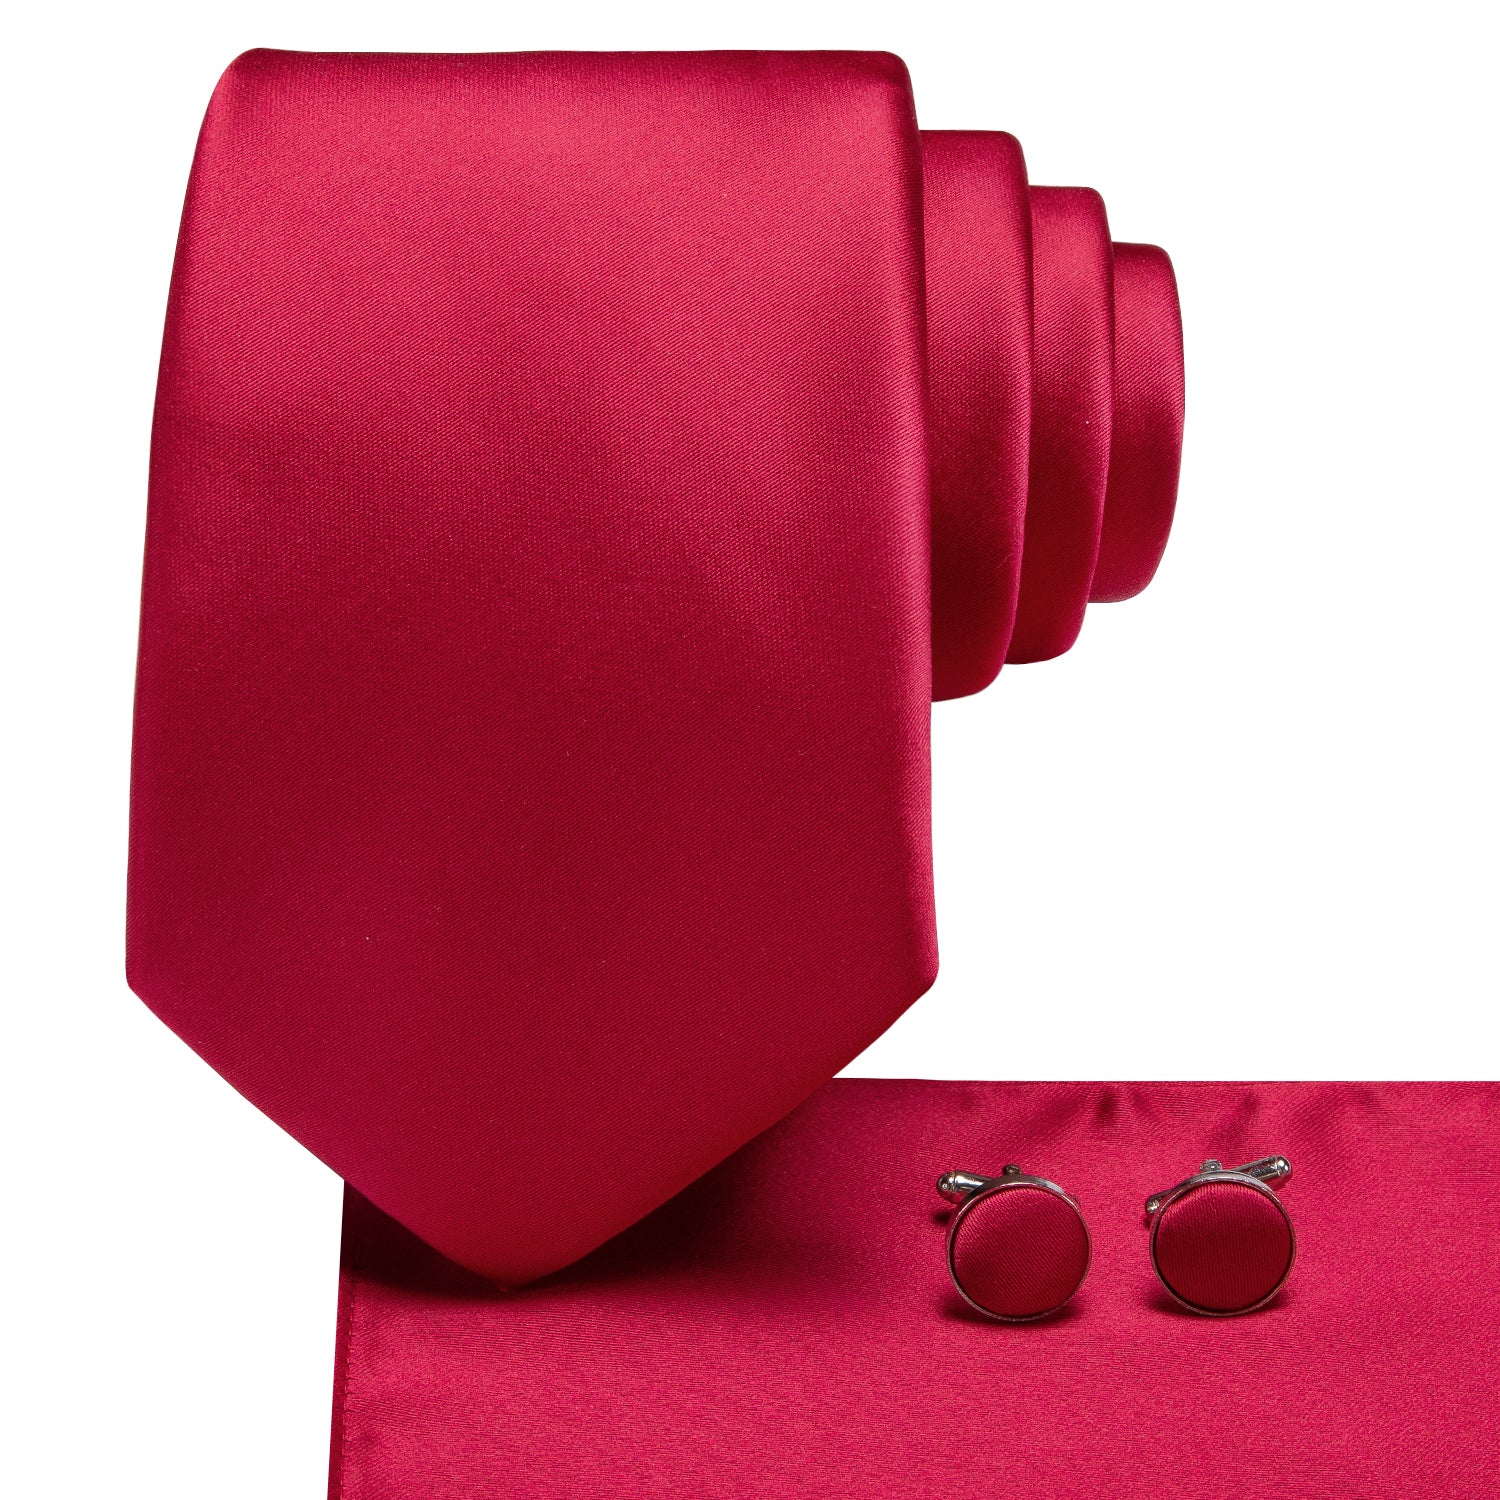 Classic Red Solid Tie Pocket Square Cufflinks Set